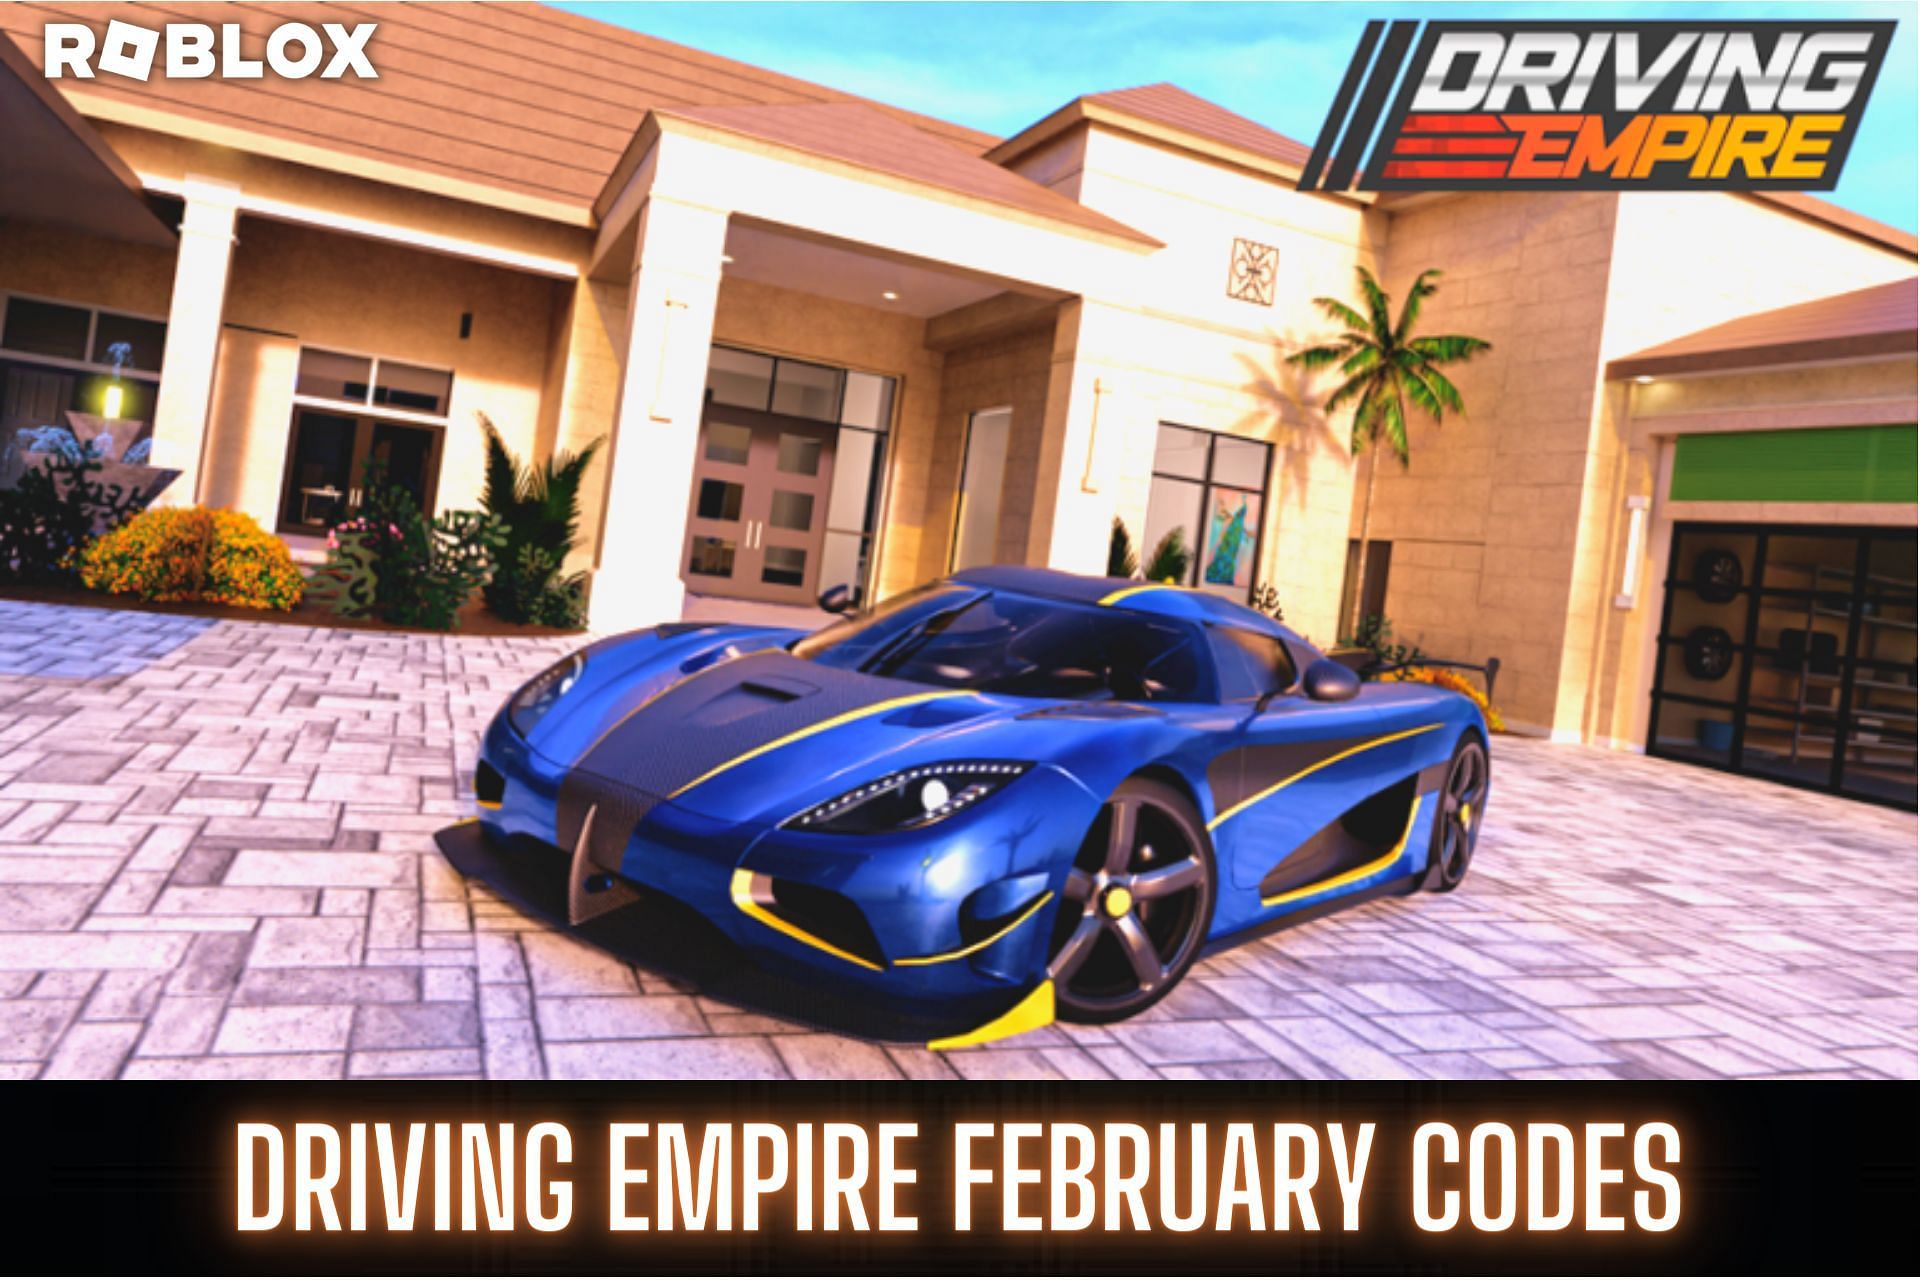 Driving Empire February codes